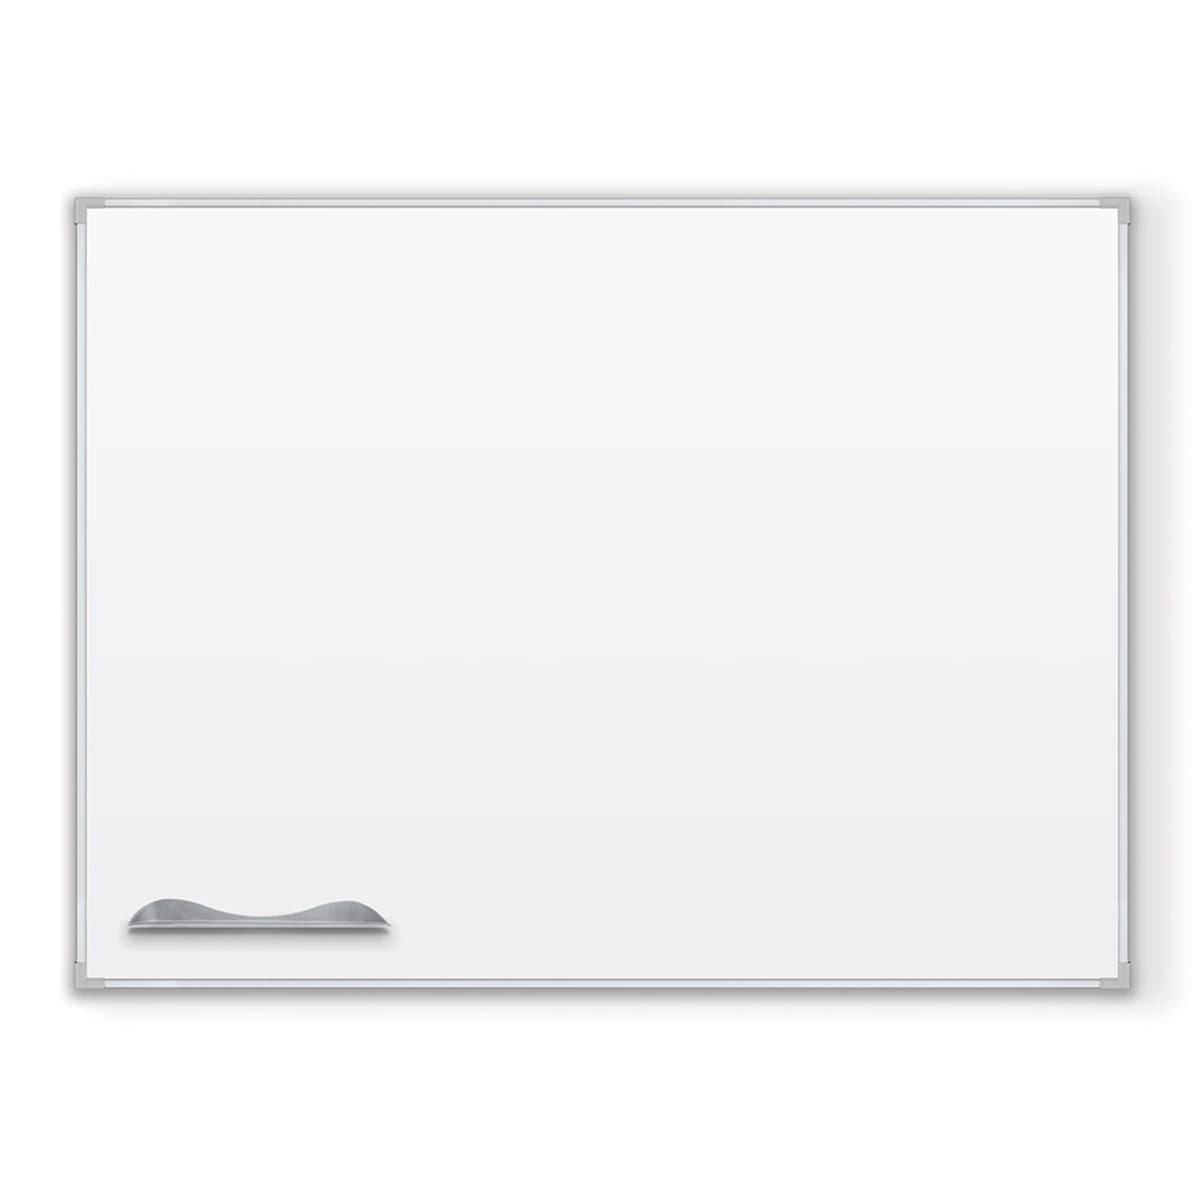 Mooreco Ultra Trim - Porcelain Markerboard Silver - 3'H x 4'W (Mooreco 2029C) - SchoolOutlet